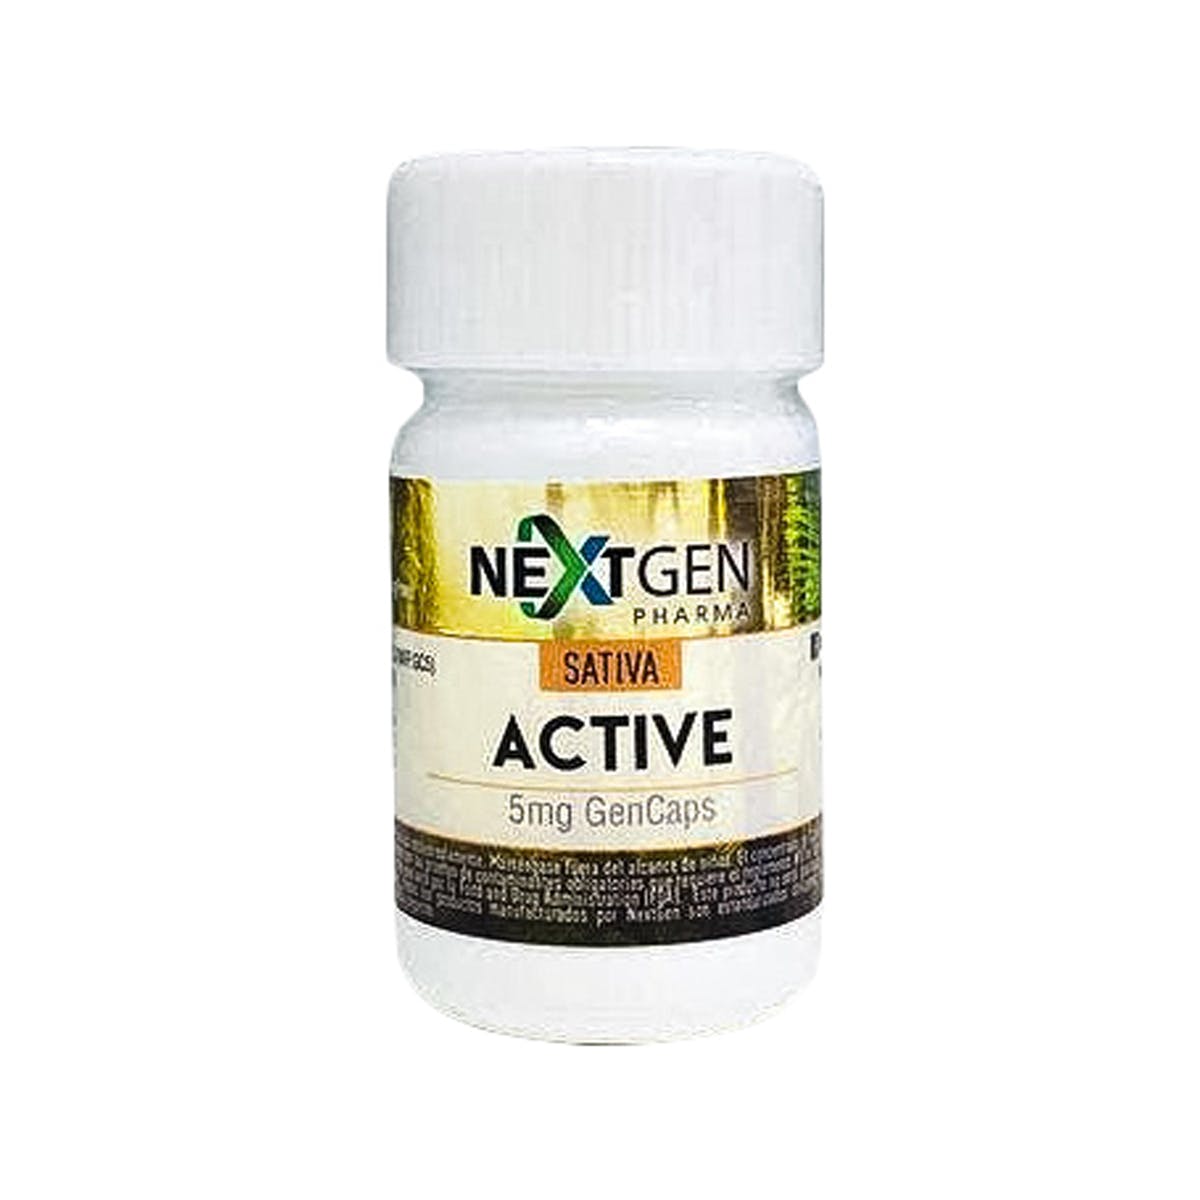 ACTIVE - 5mg THC Capsules